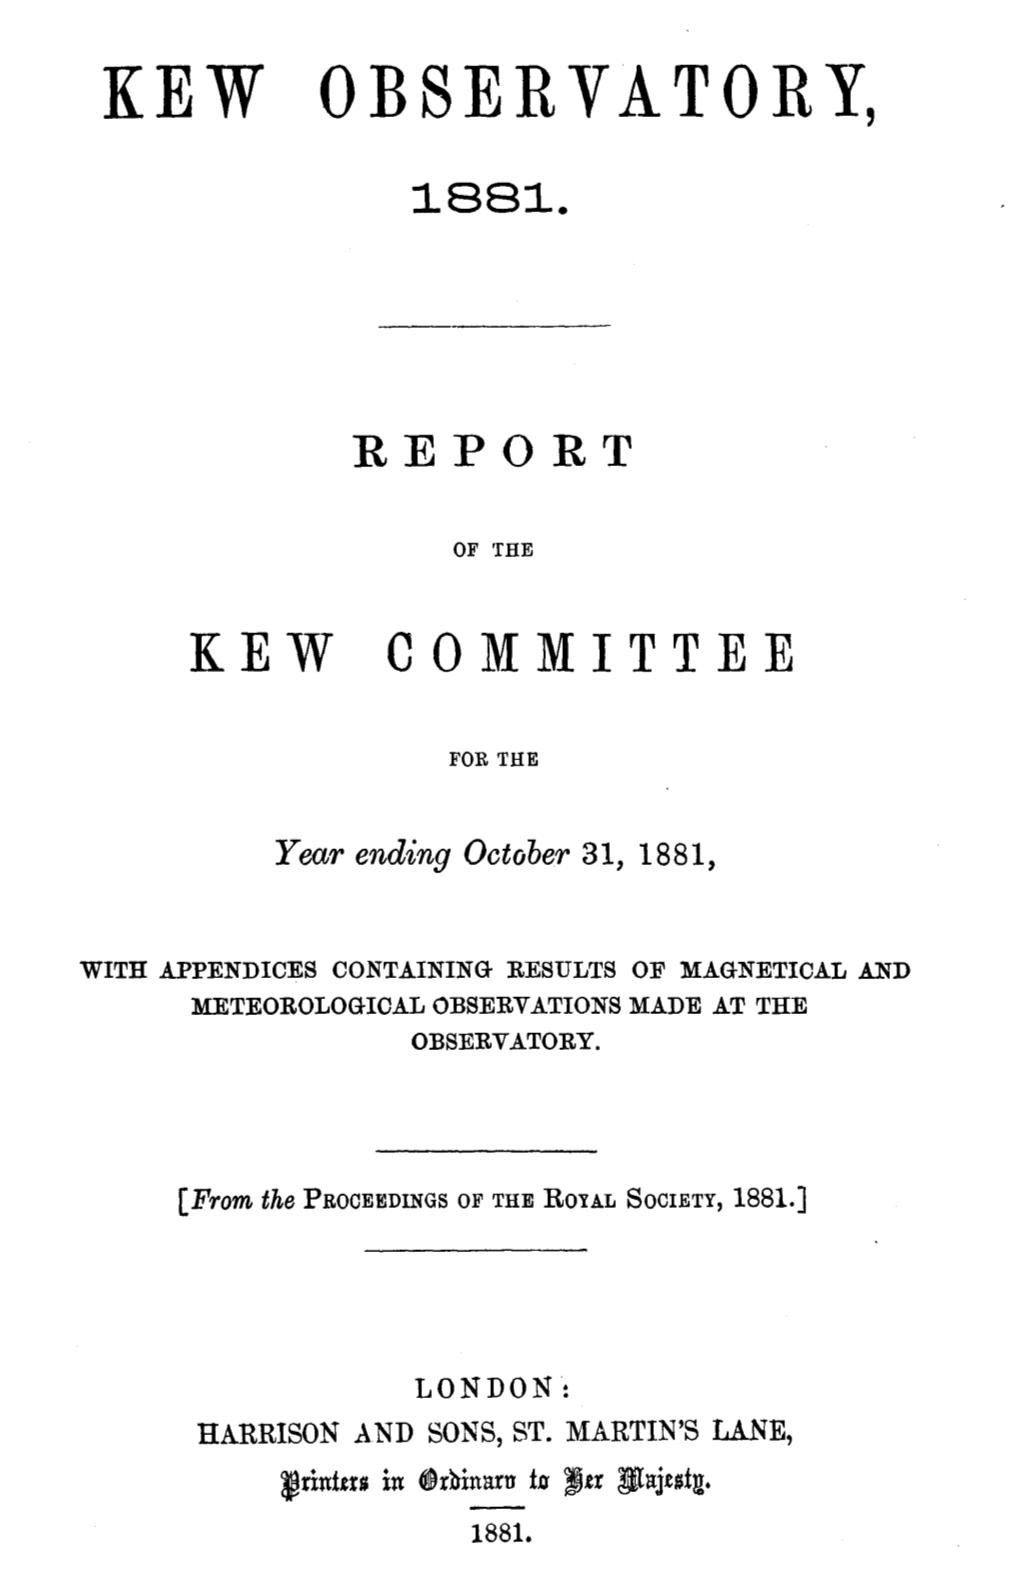 Report of the Kew Committee for the Year Ending October 31, 1881